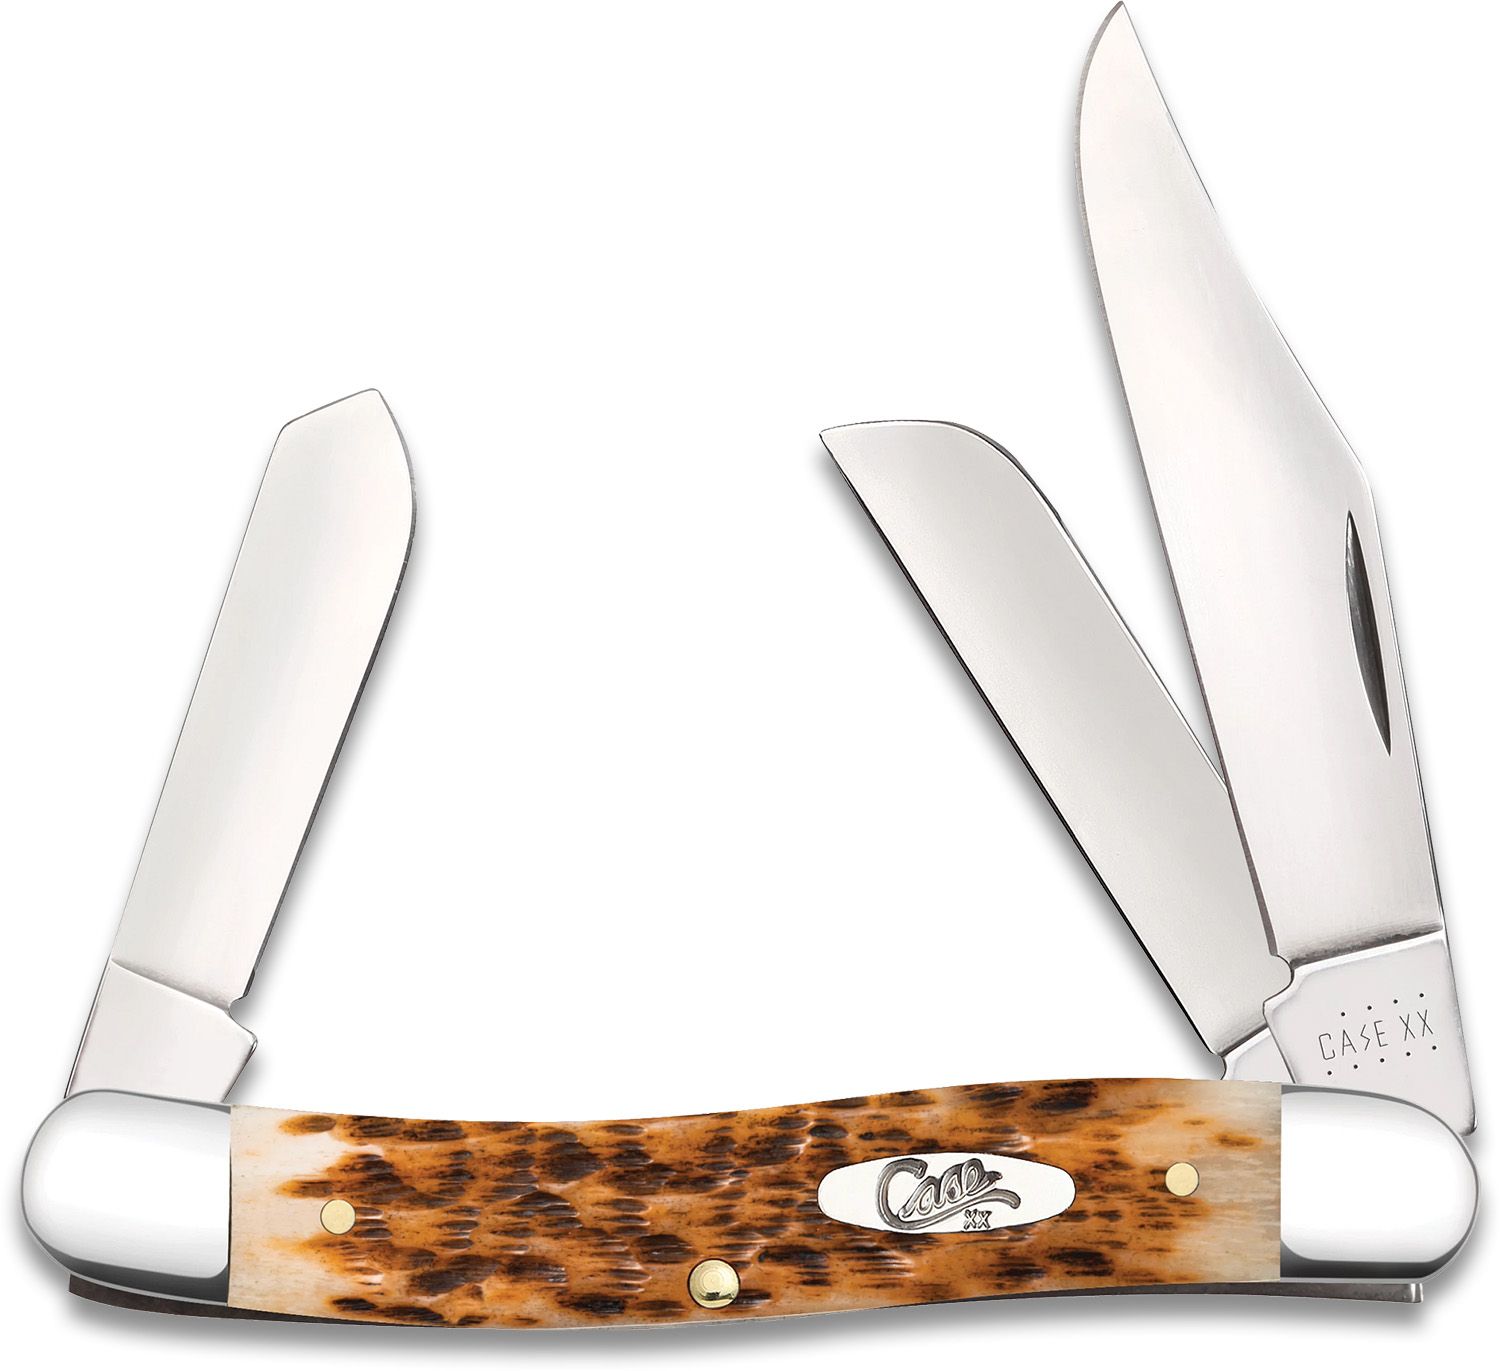 The LARGEST Stockman Knife 